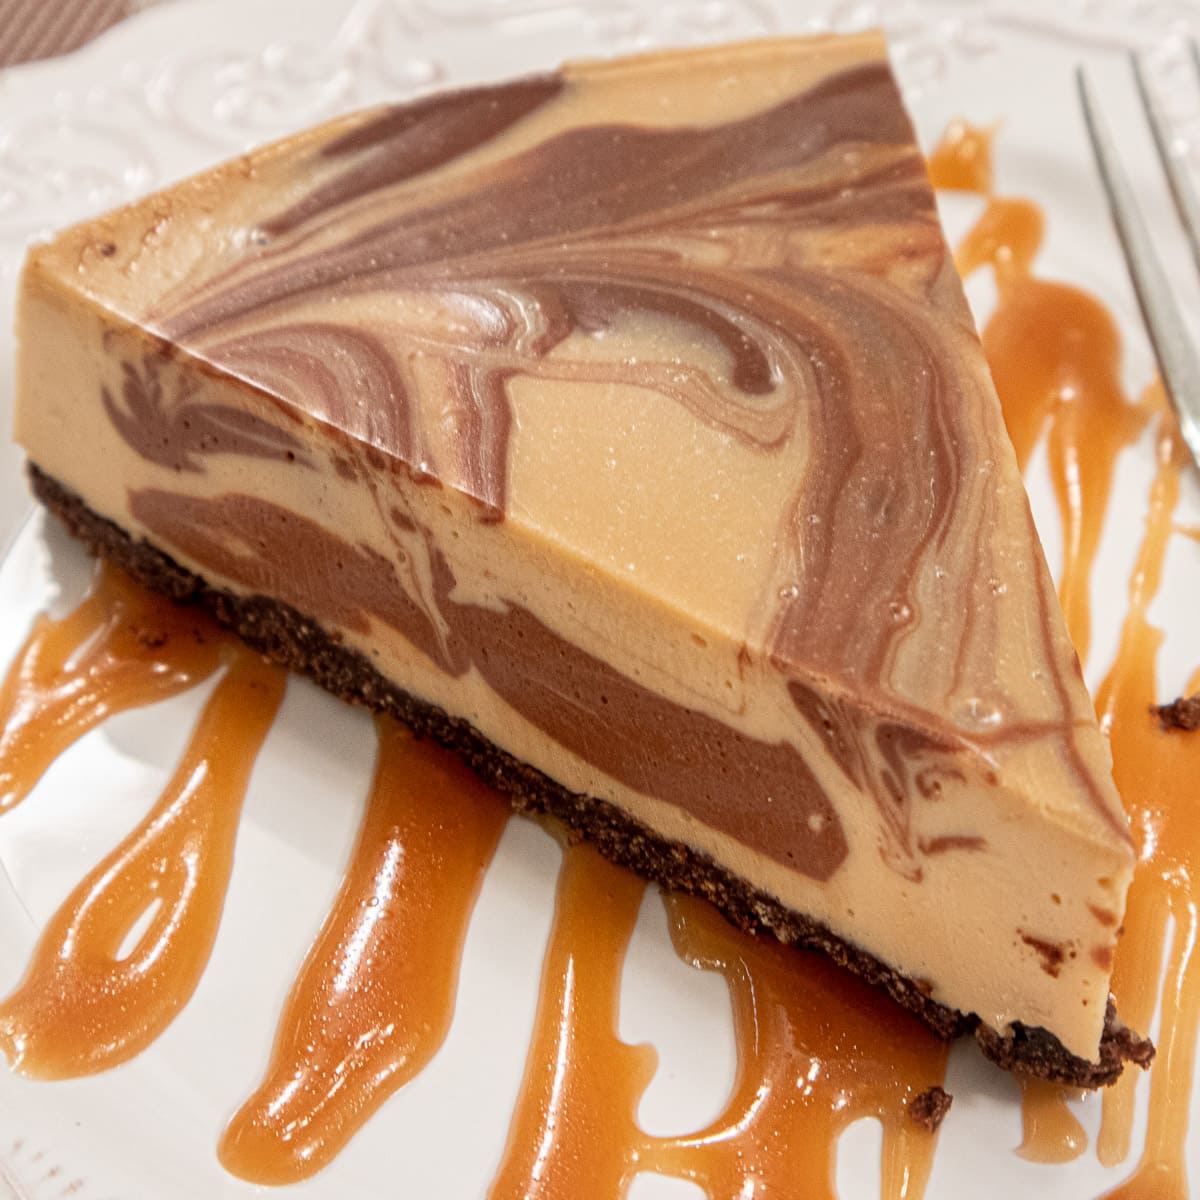 This Chocolate Coffee No Bake Cheesecake sits on a drizzle of caramel sauce